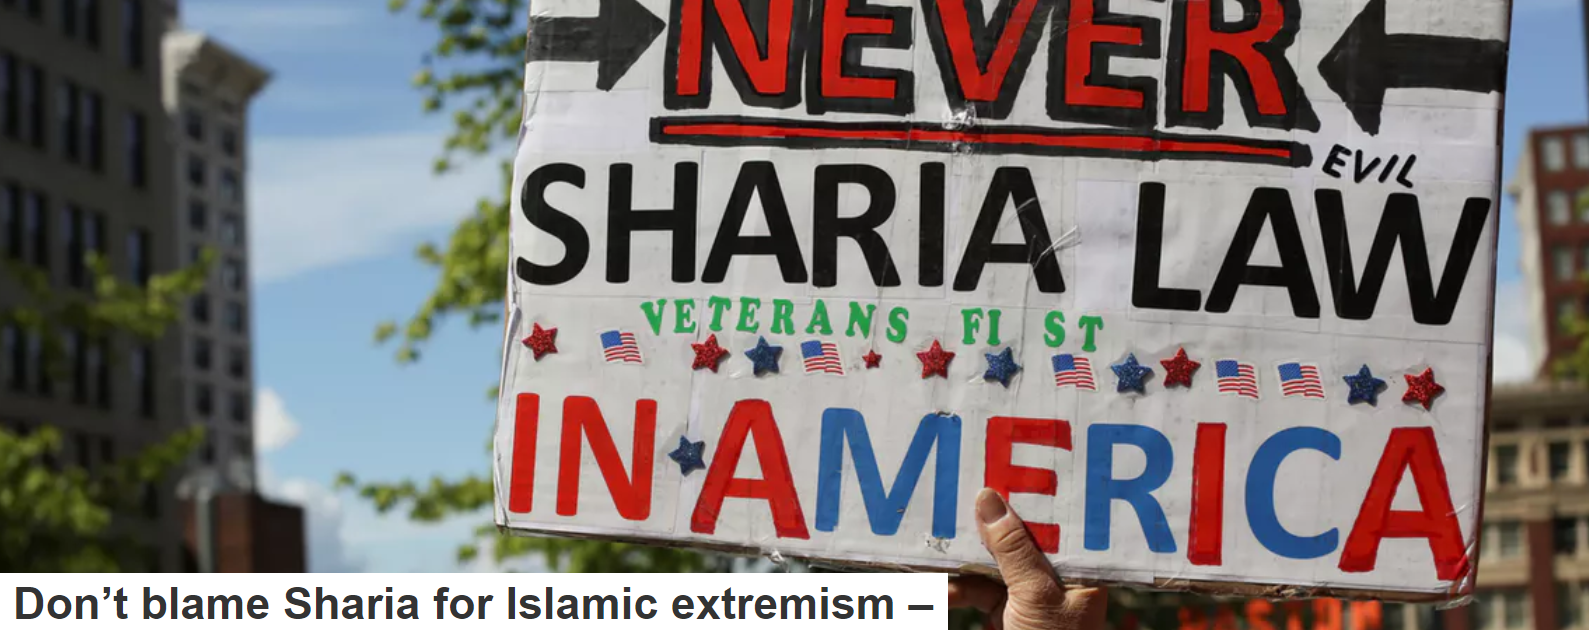 Don’t blame Sharia for Islamic extremism – blame colonialism